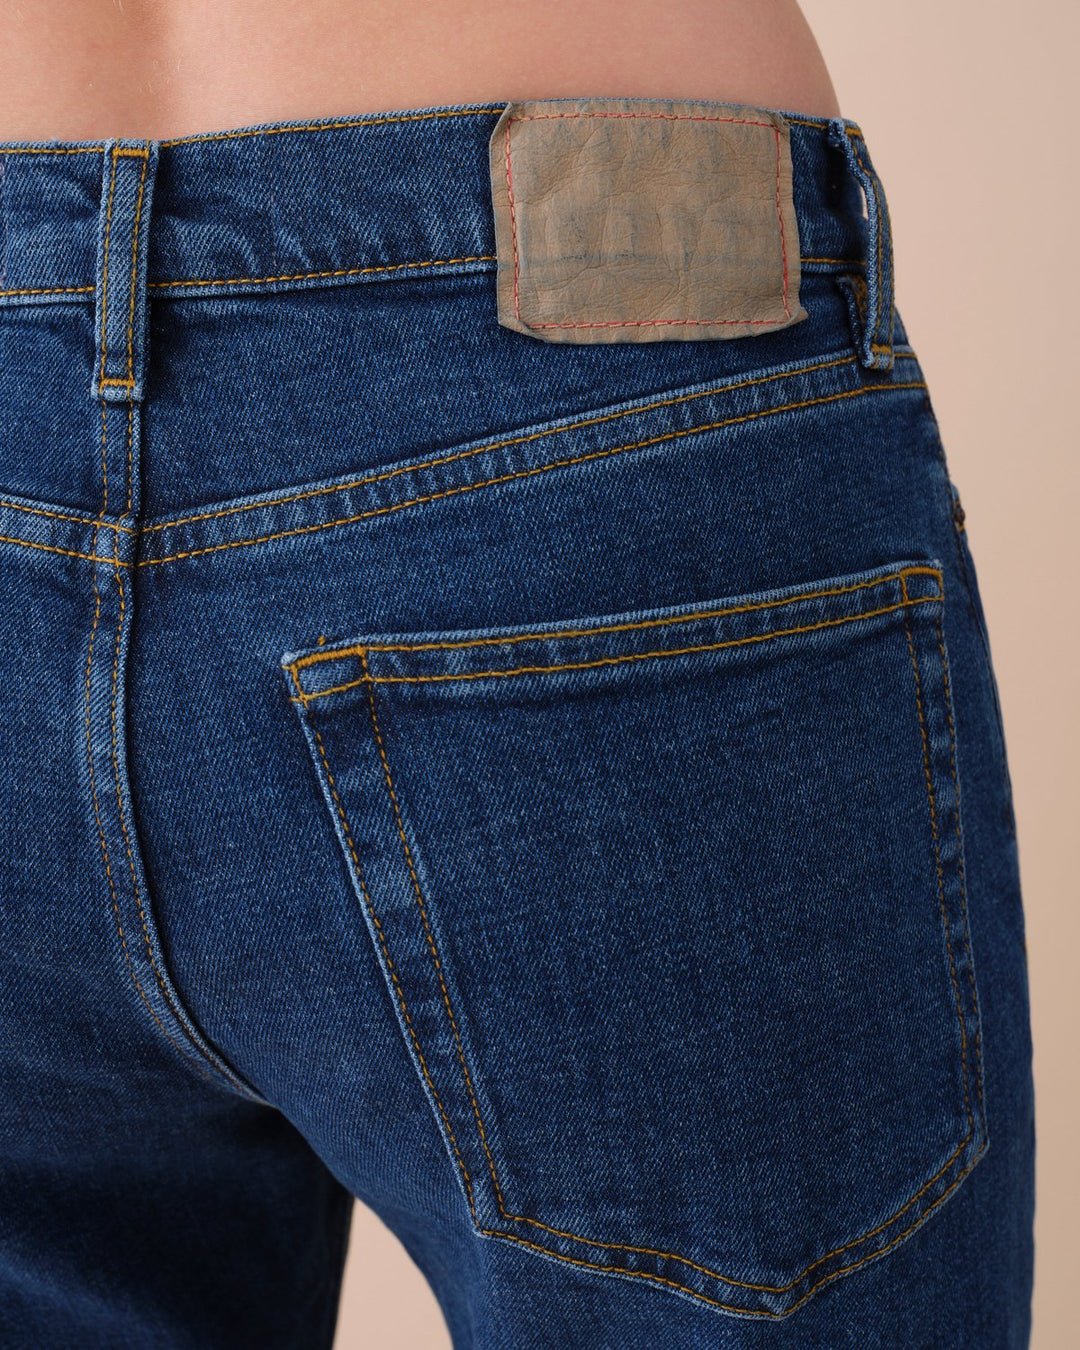 Jeanerica – Classic Jeans in Vintage 95